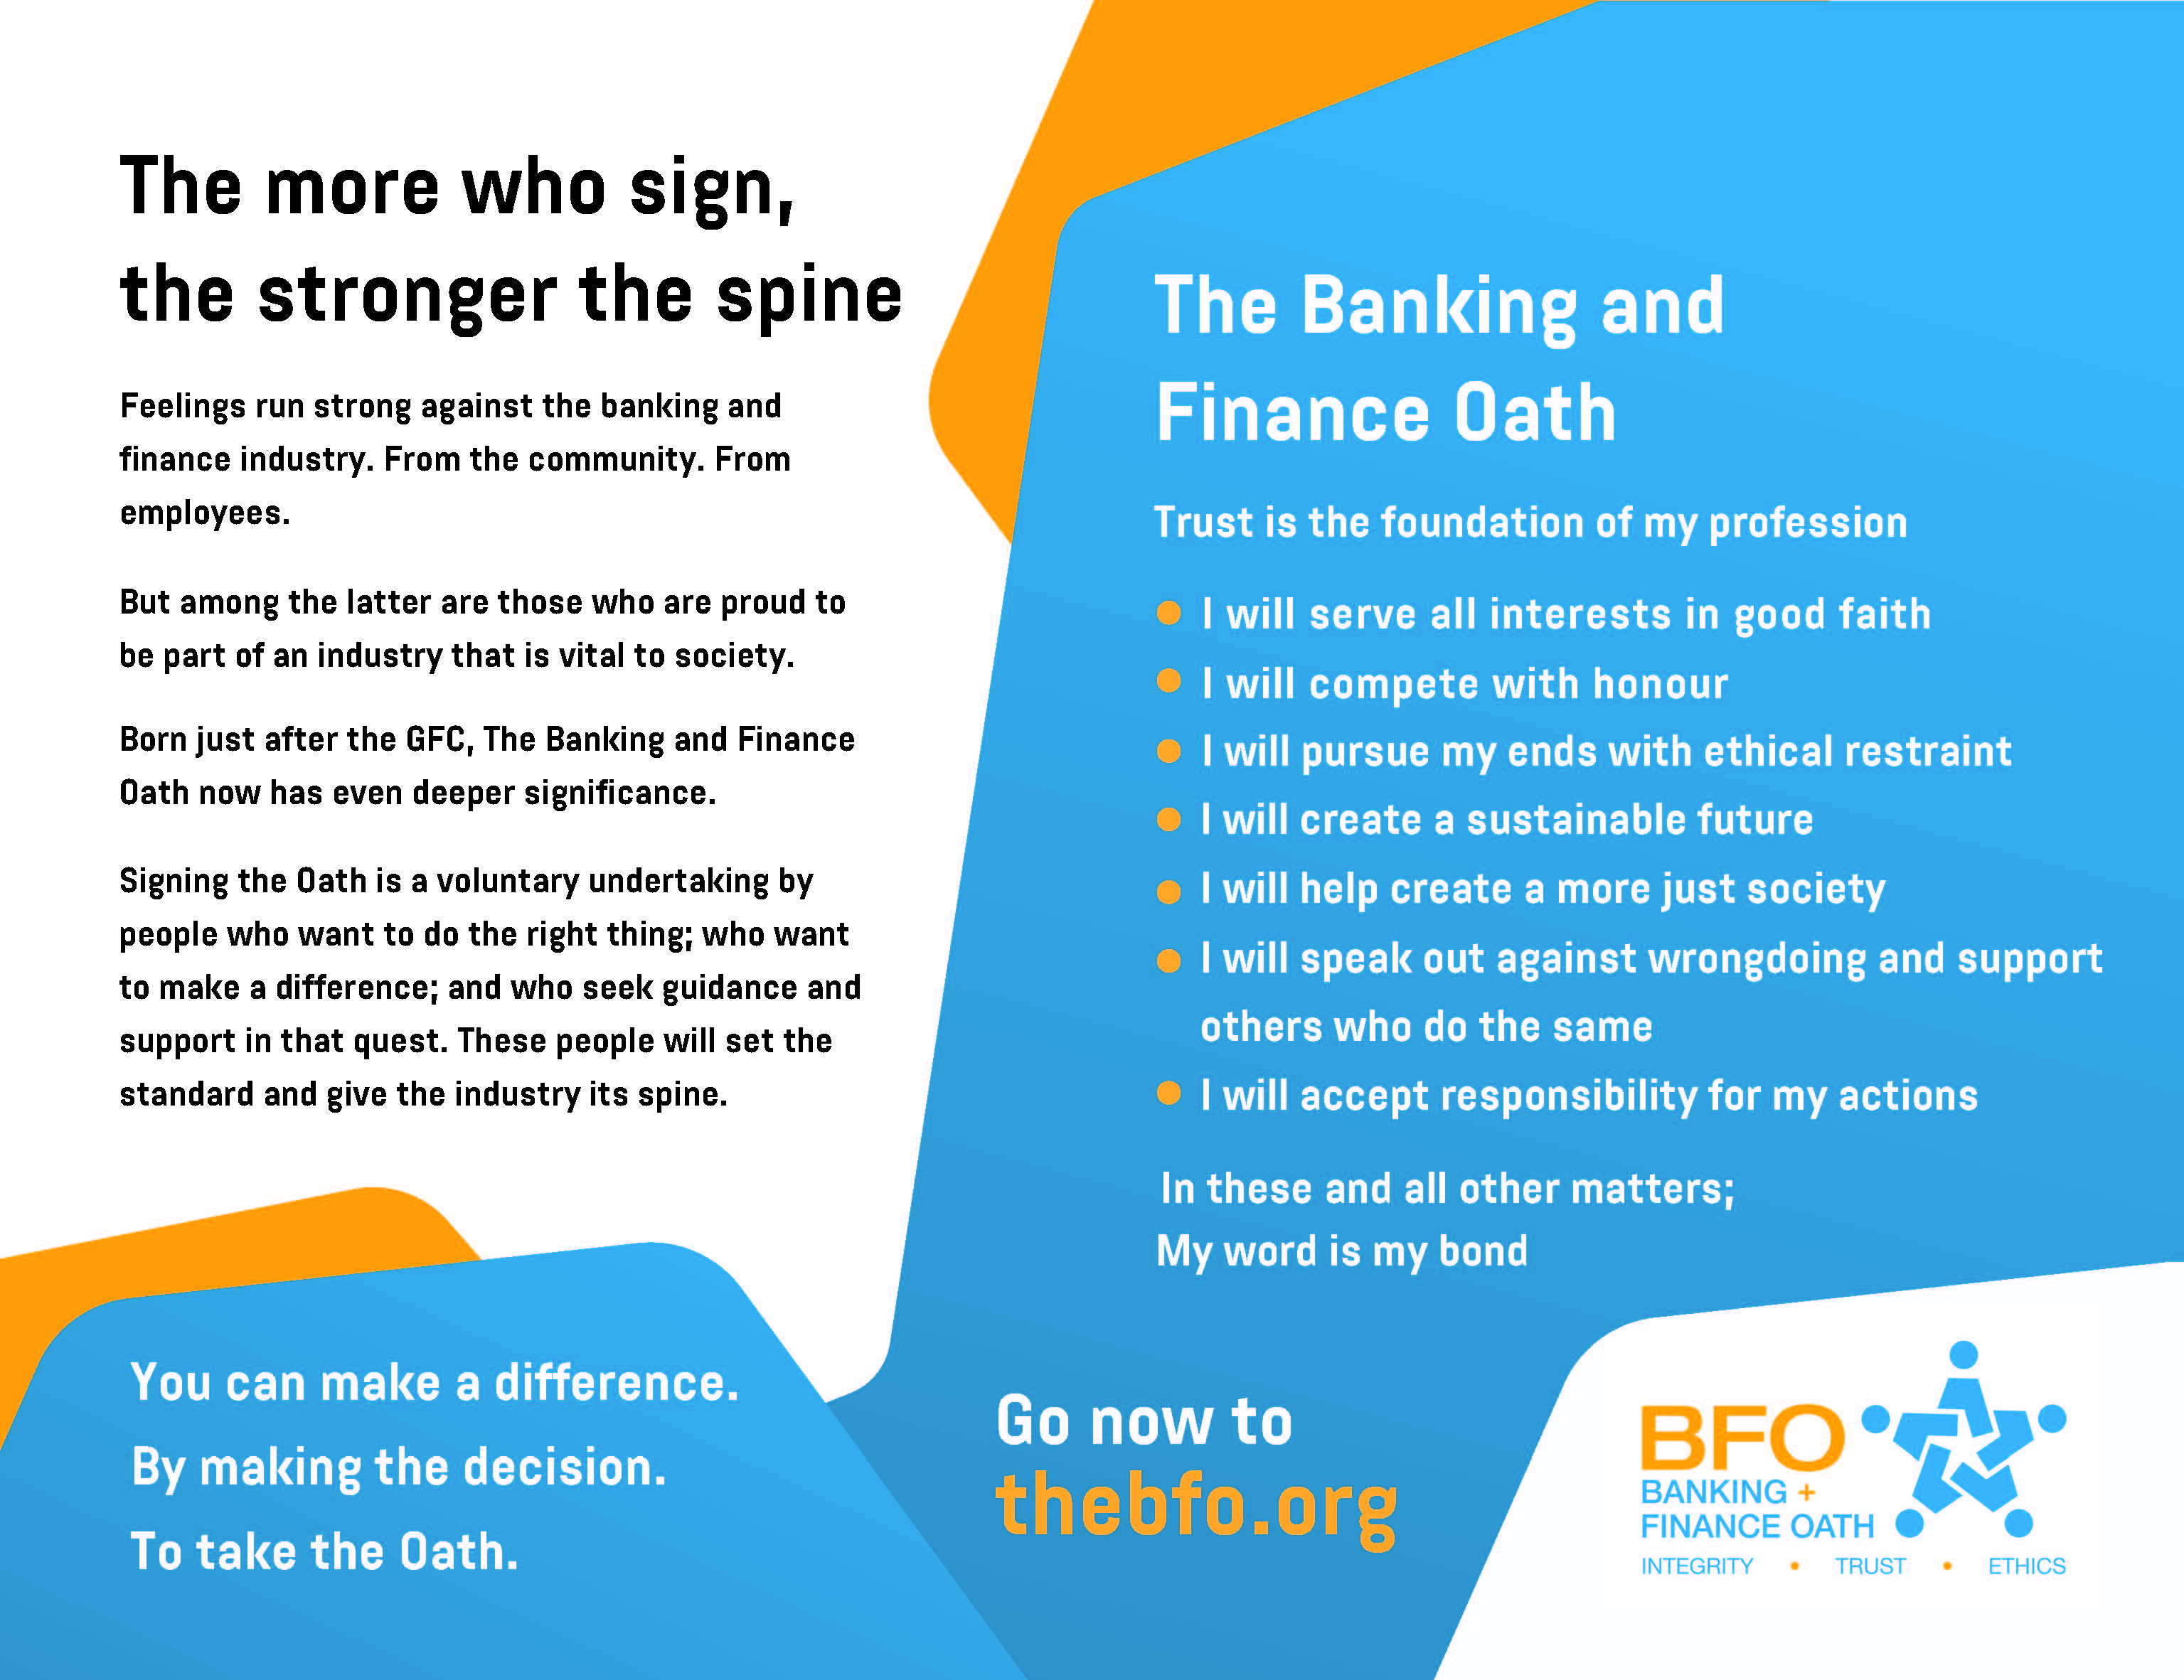 The Banking and Finance Oath launches first ever ad campaign